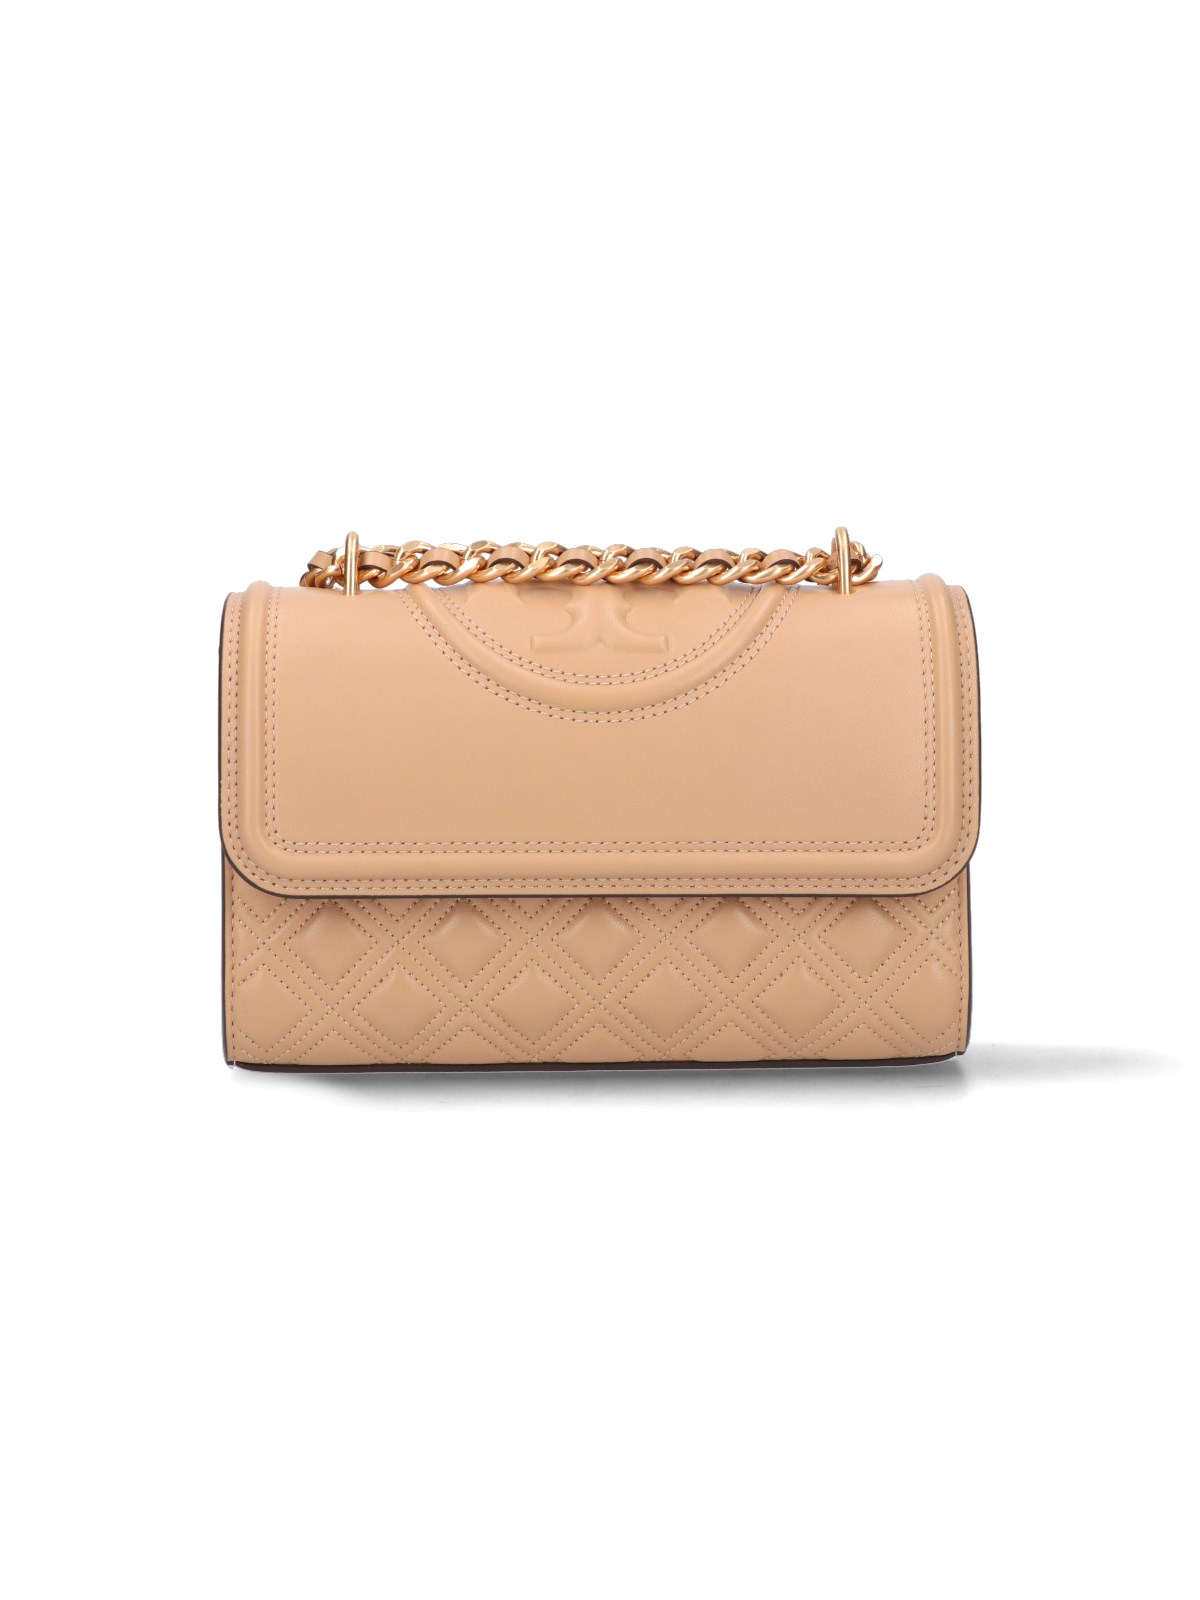 Tory Burch Small Fleming Shoulder Bag In Beige